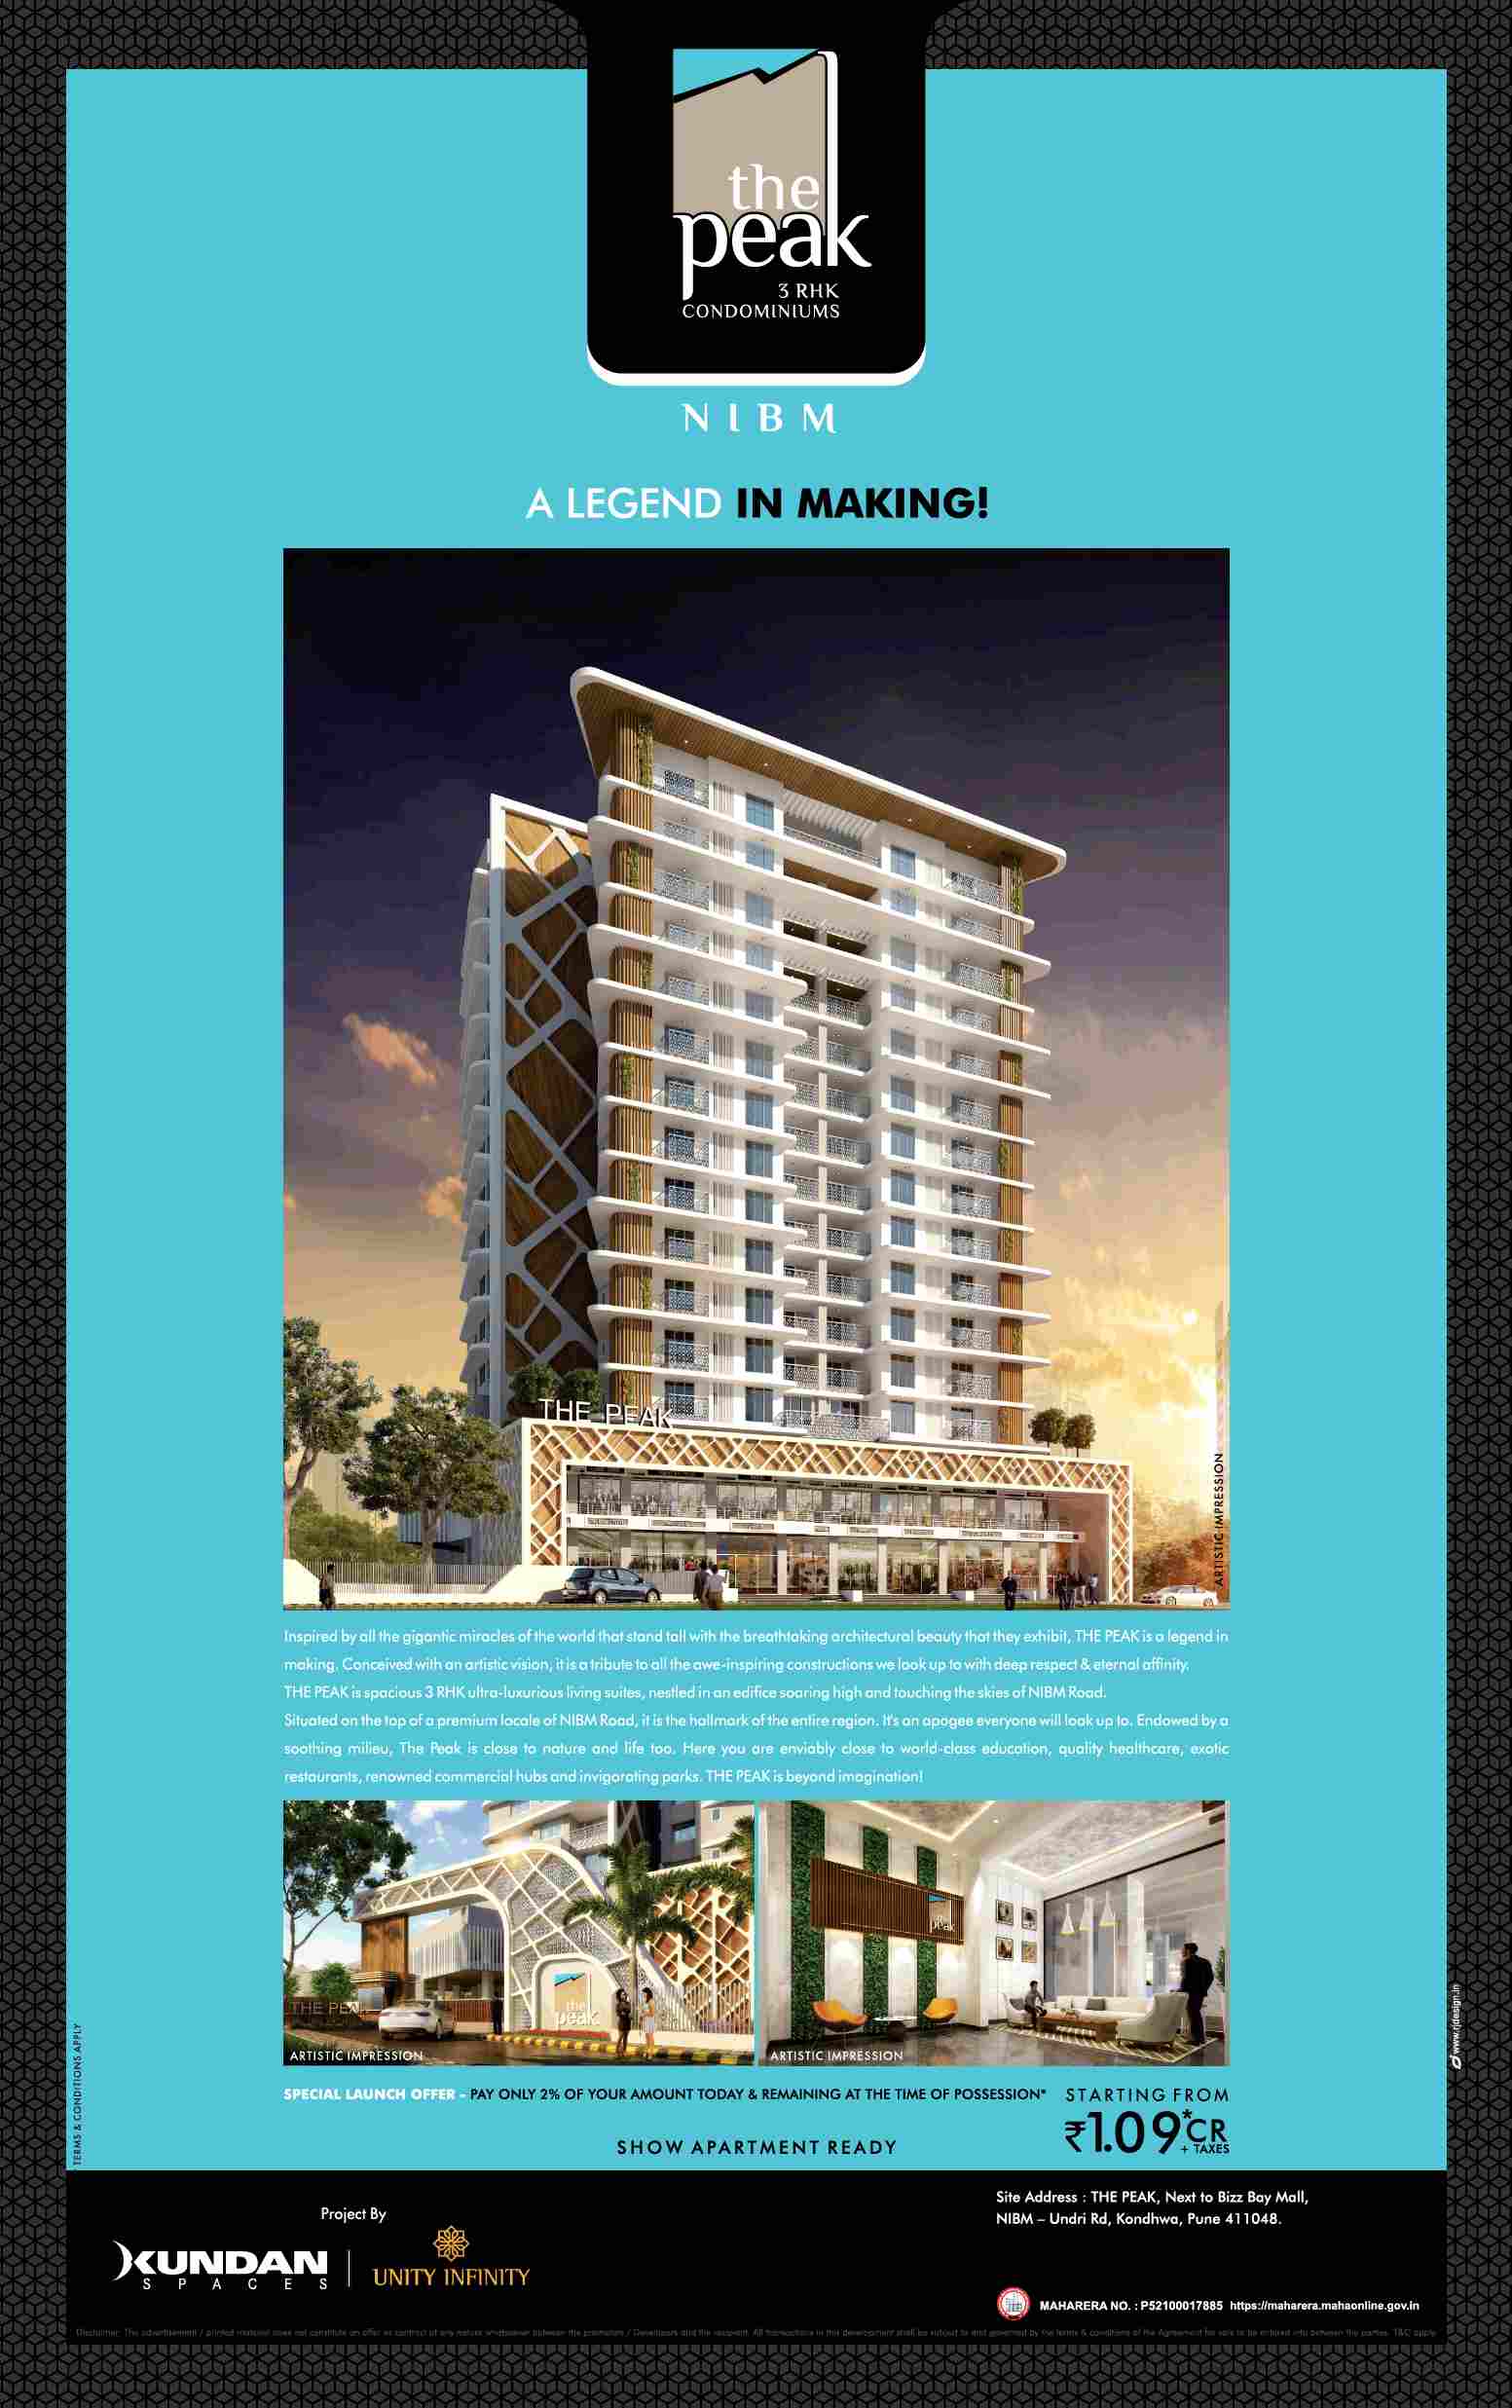 Pay only 2% & remaining on possession at Kundan The Peak in Pune